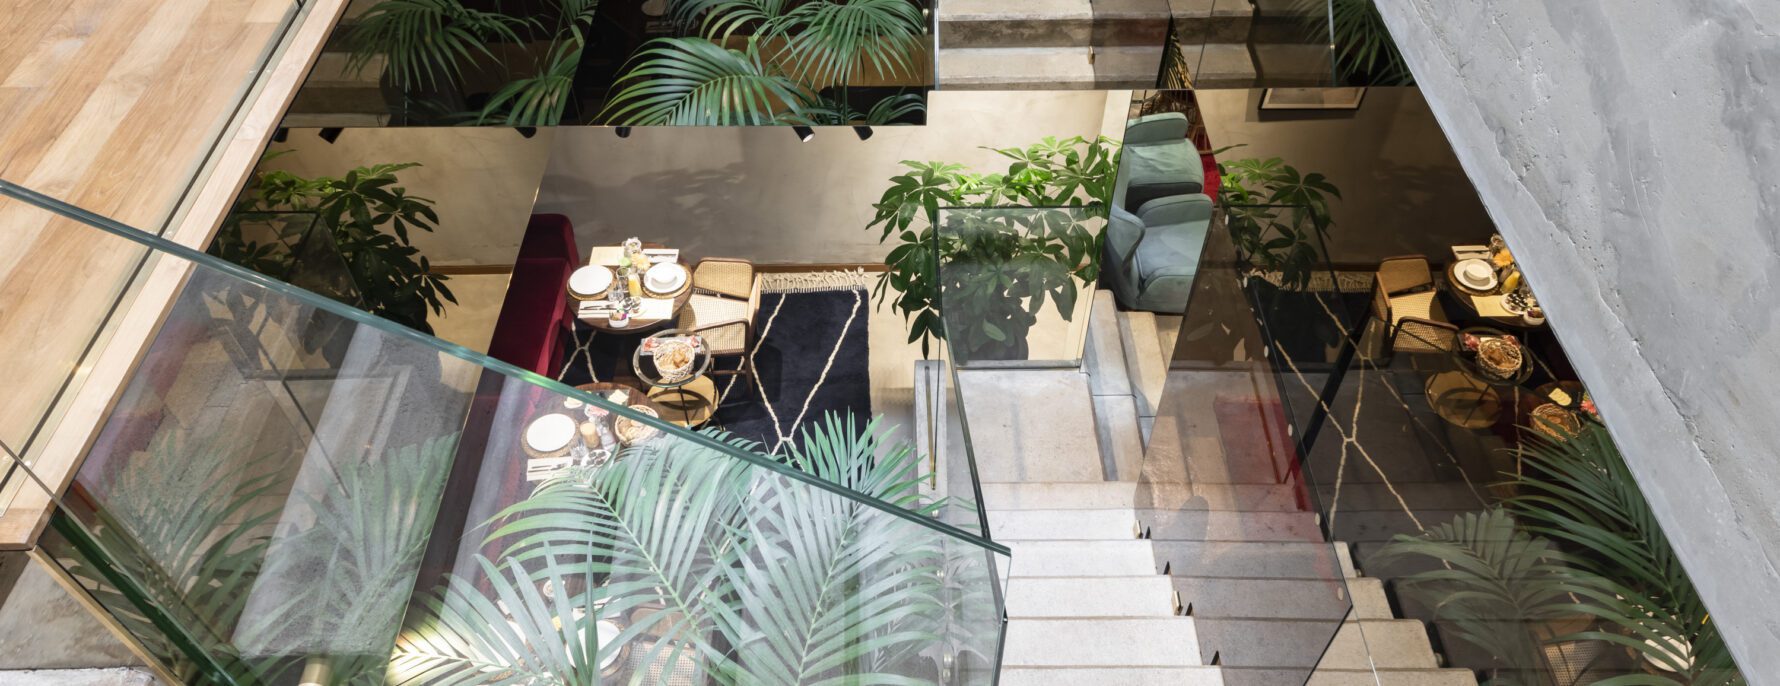 Nest Italy: Boutique Hotel in Milan's Fashion District